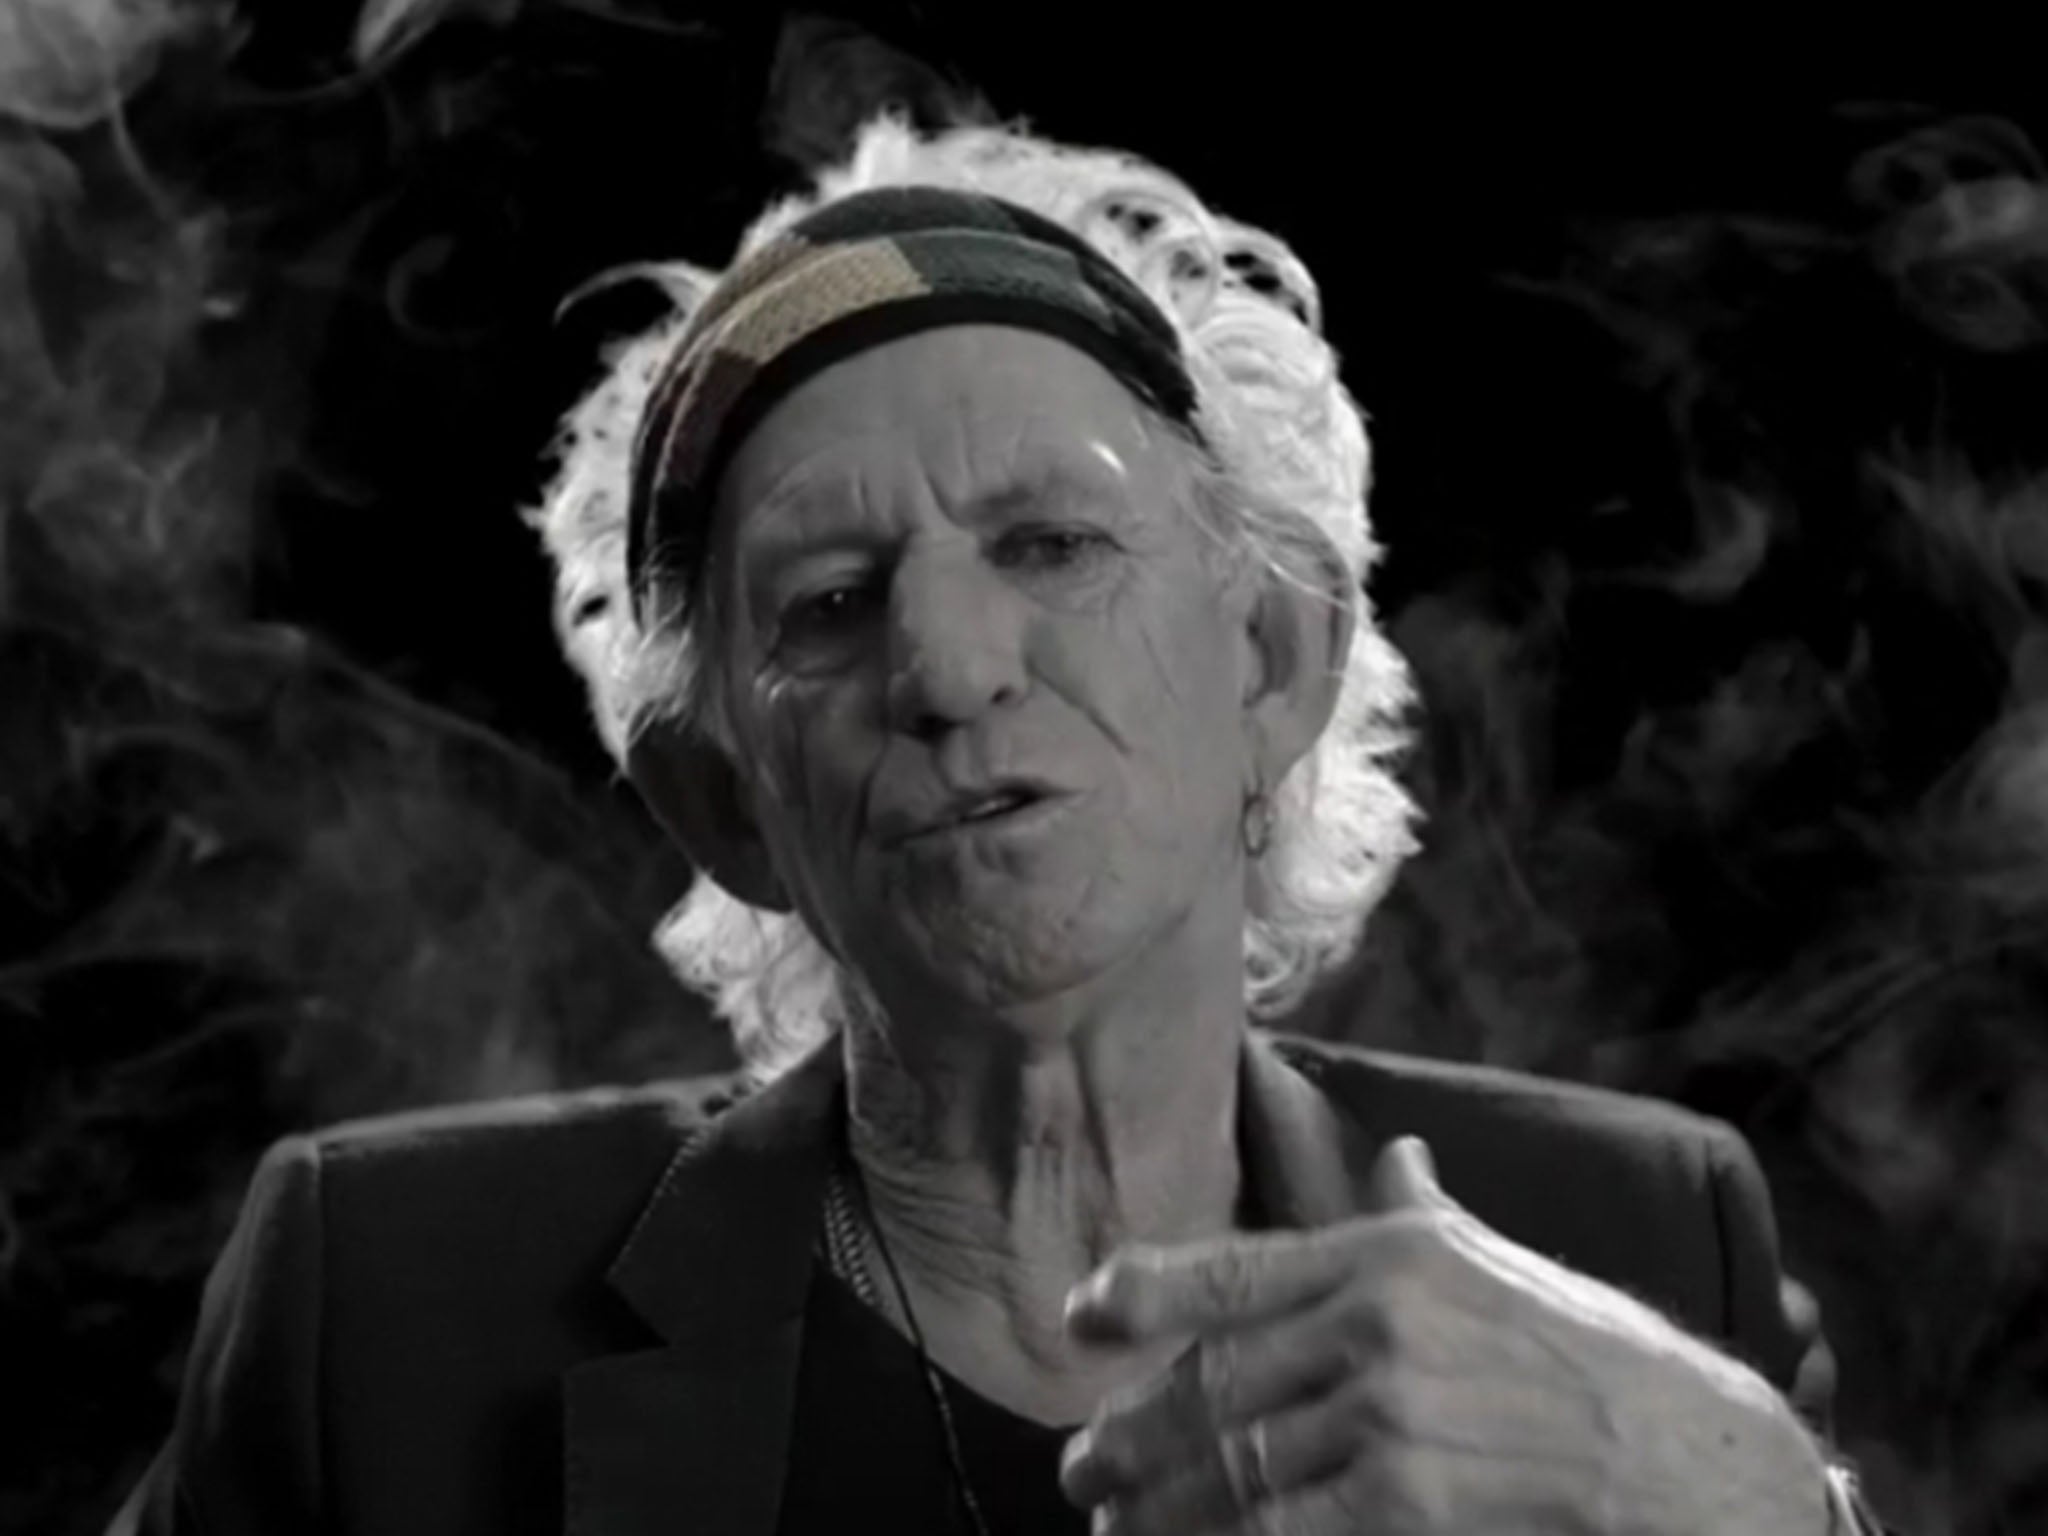 Keith Richards in Julien Temple’s 2016 documentary ‘The Origin of the Species’ is largely about hero-worshipping Richards to an unhealthy degree